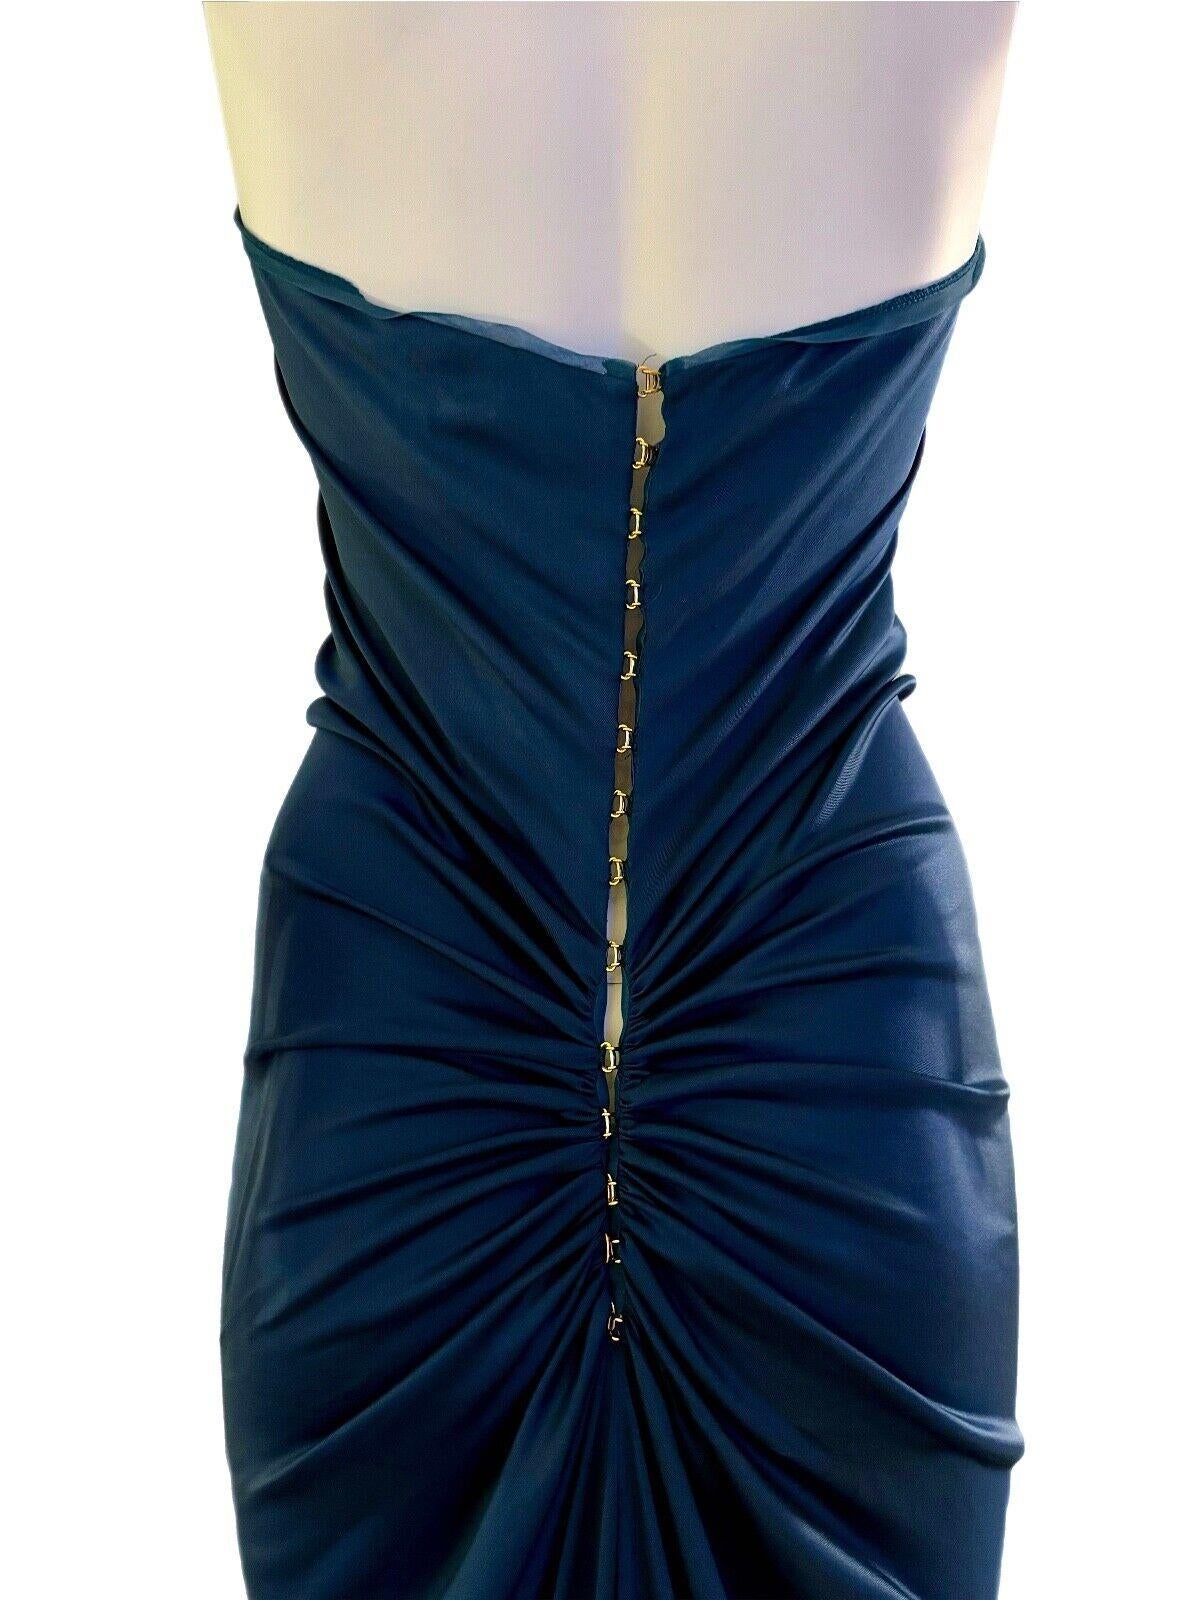 Women's YSL by Tom Ford Rive Gauche Vintage evening gown maxi dress For Sale